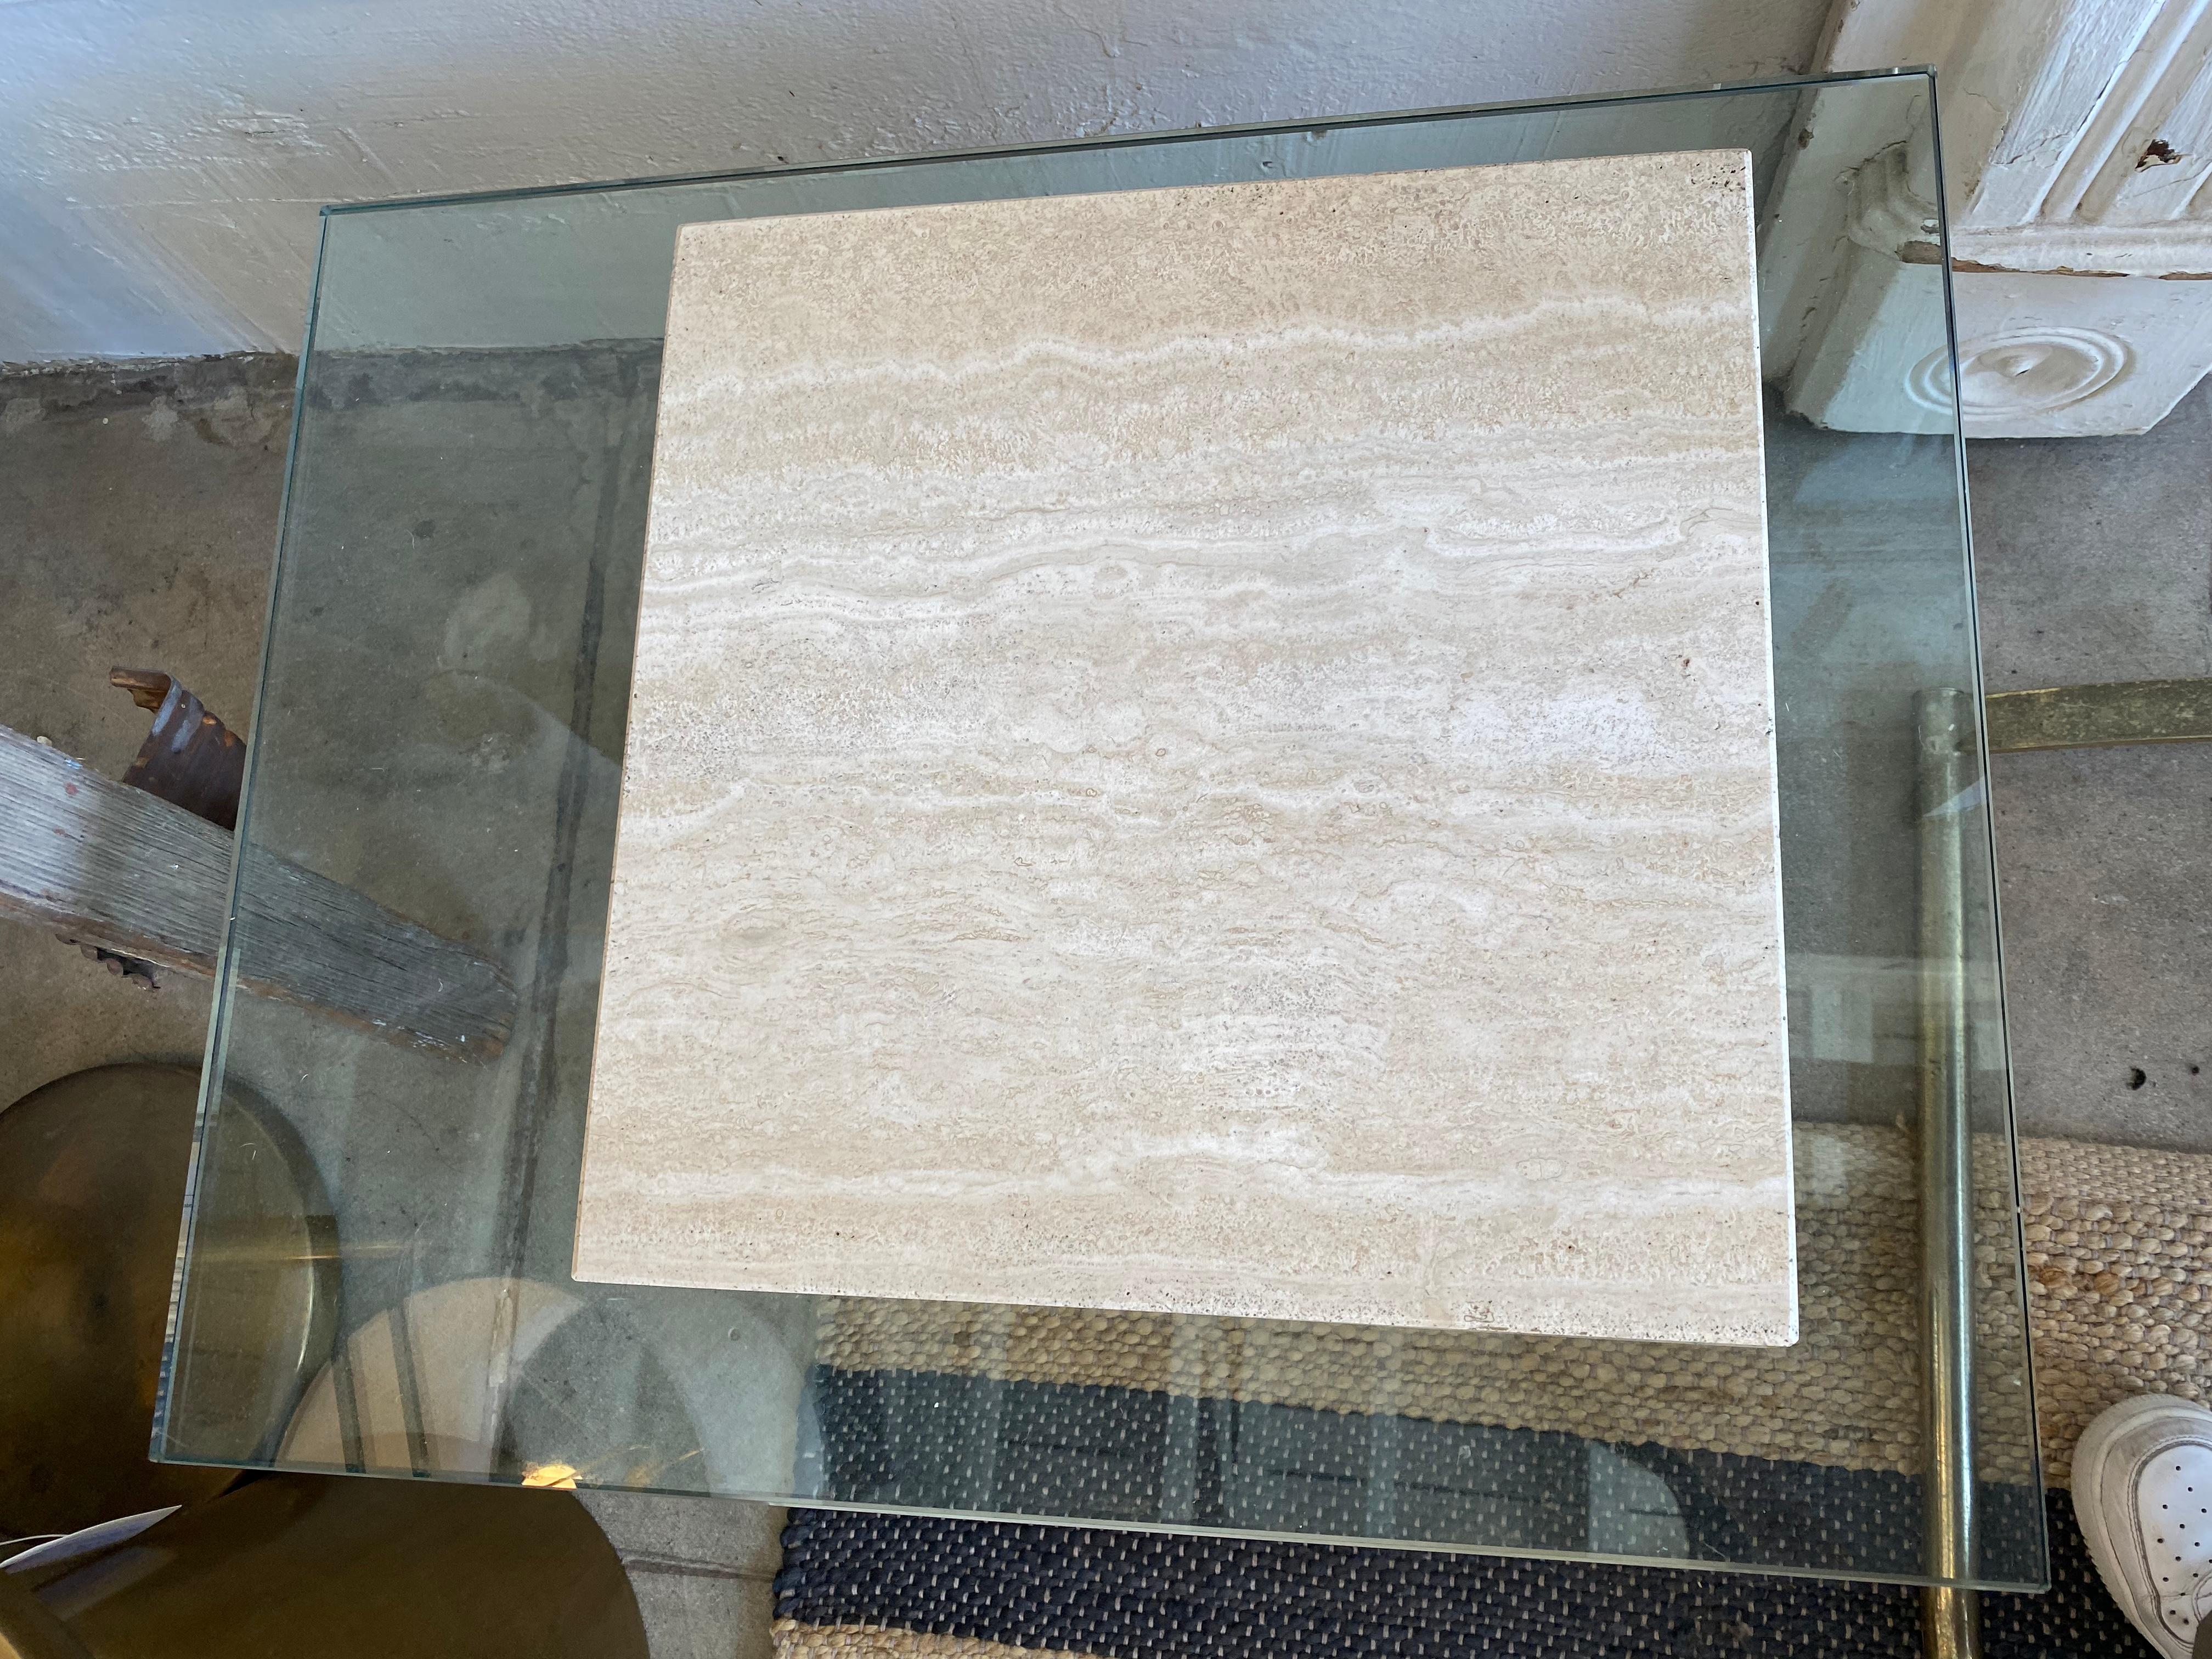 Modern travertine table with offset glass top. Constructed from one solid piece of Travertine, the glass top sits between the base and a cut-out top. The glass can be removed for ease of transport, travertine top is fixed to the glass. A beautiful